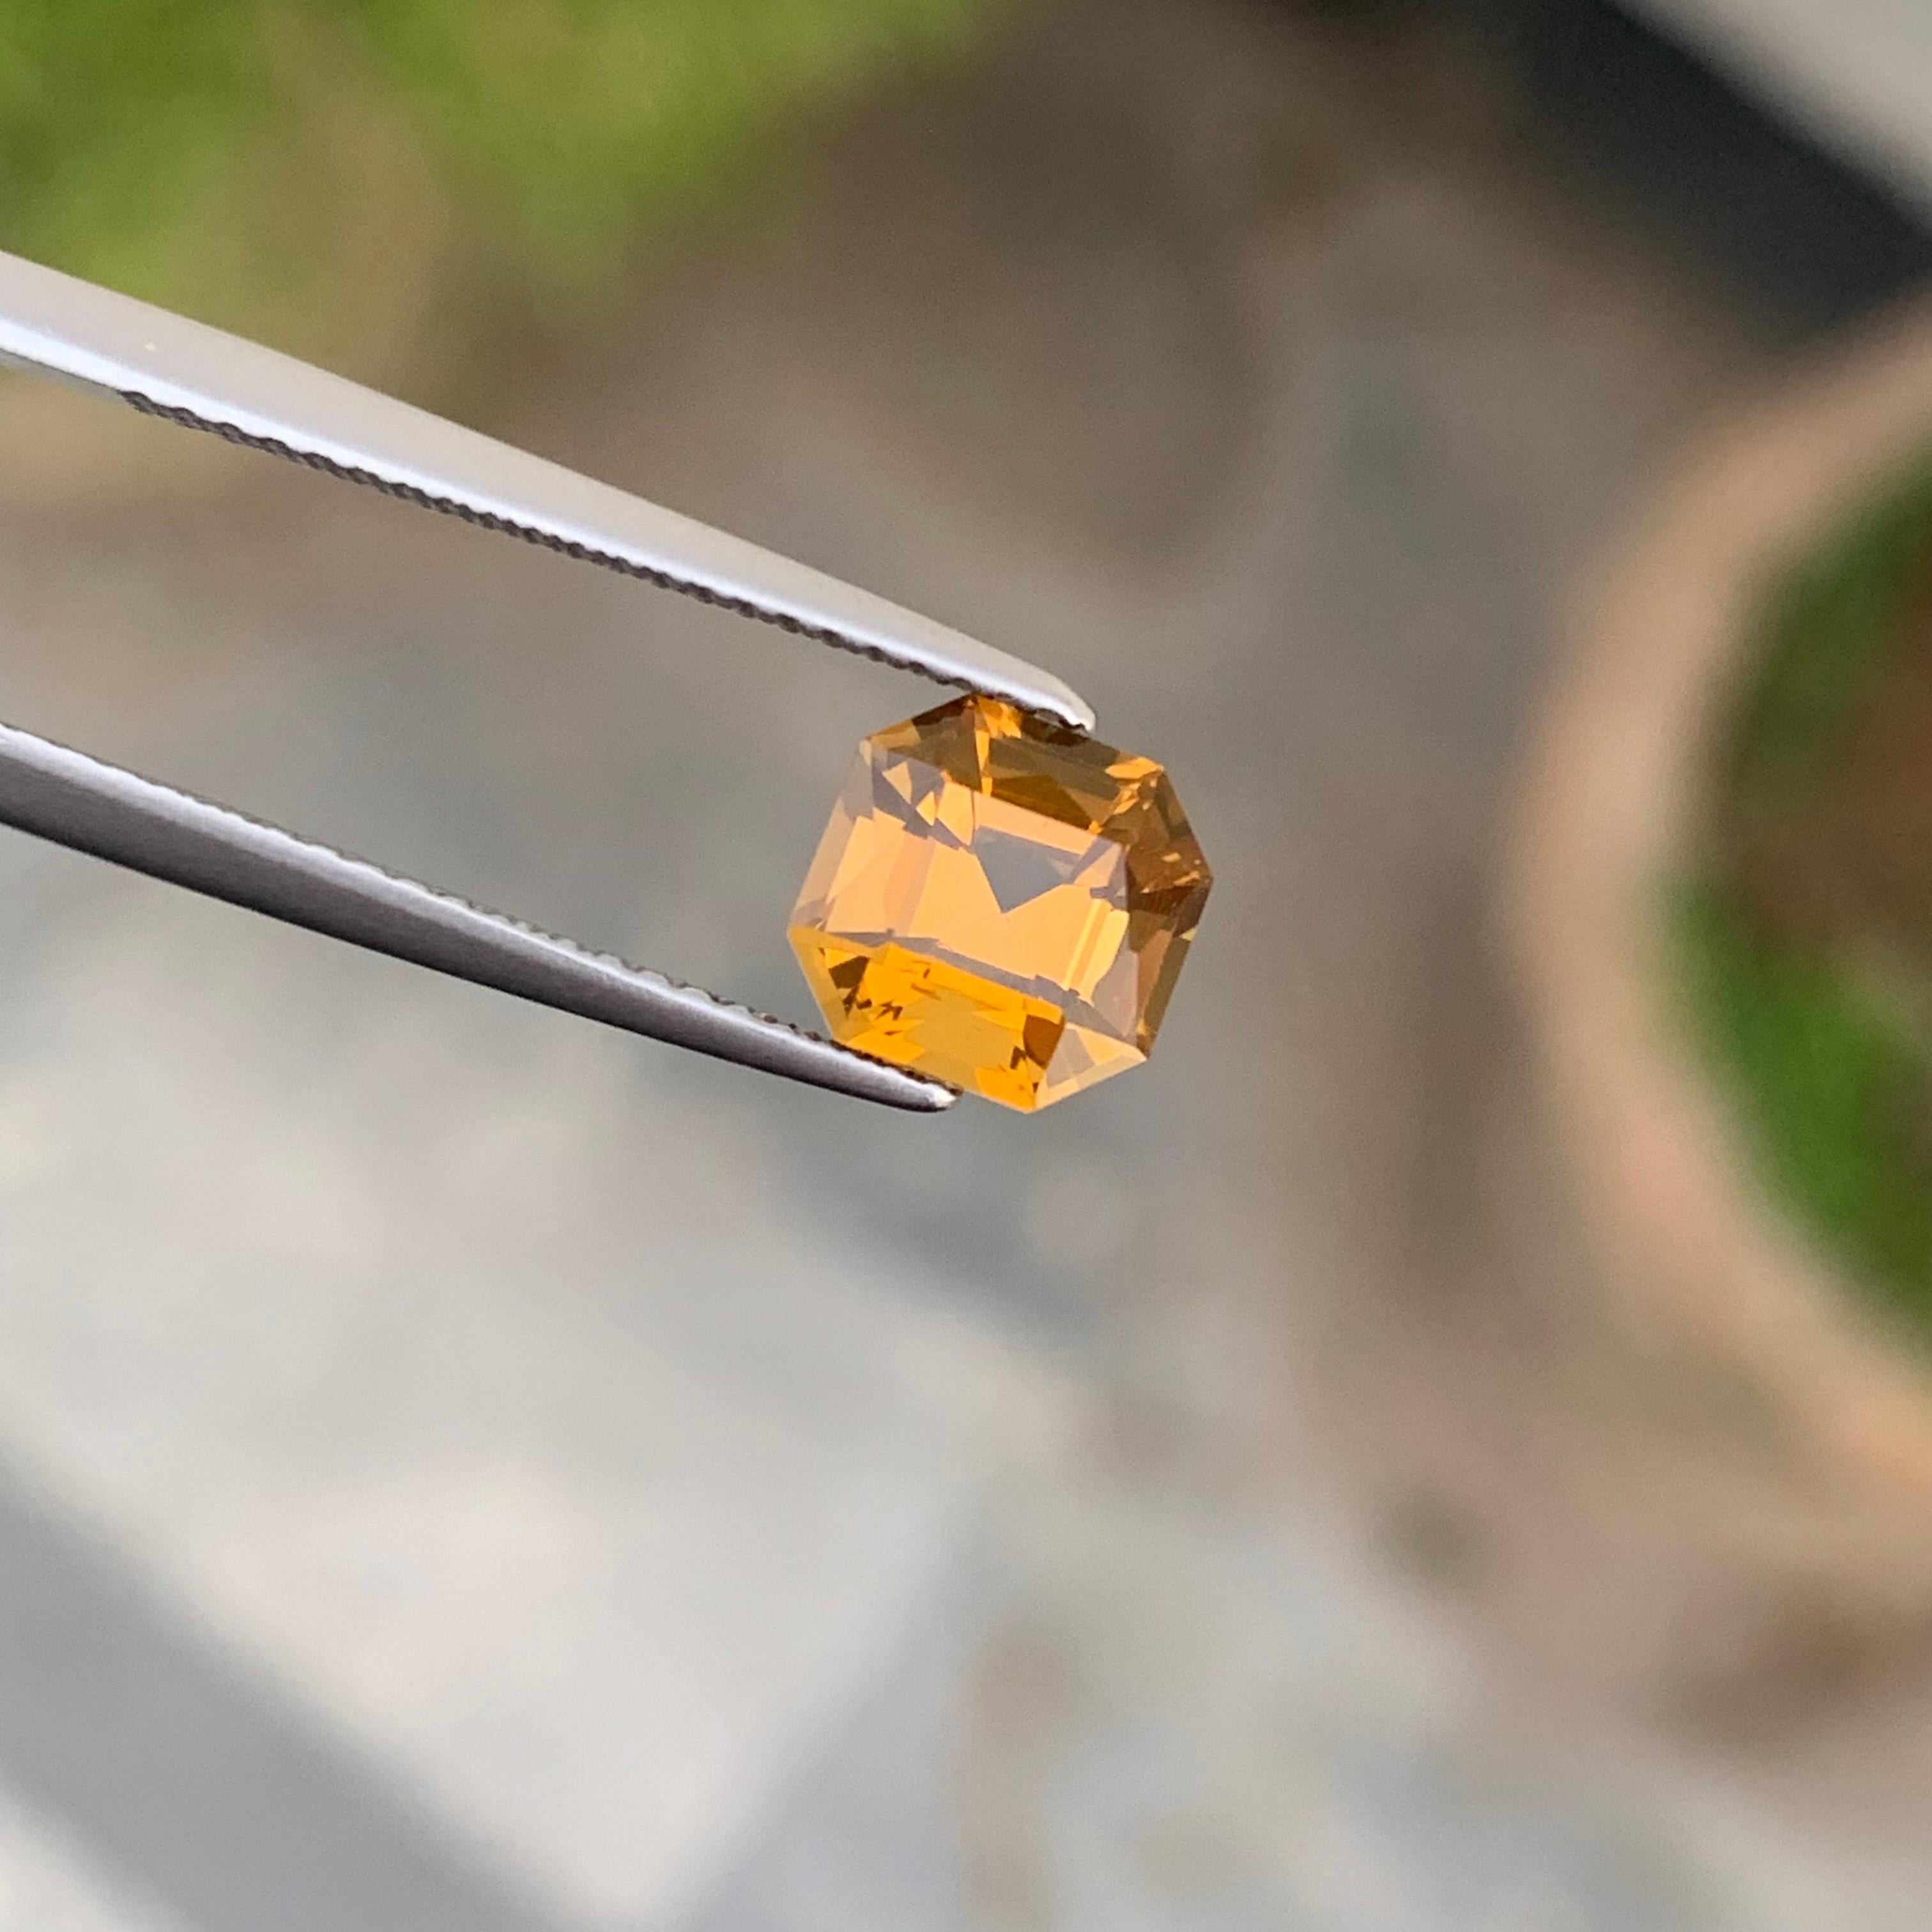 Octagon Cut Gorgeous 1.60 Carat Loose Yellow Citrine from Brazil Availabe for Sale For Sale